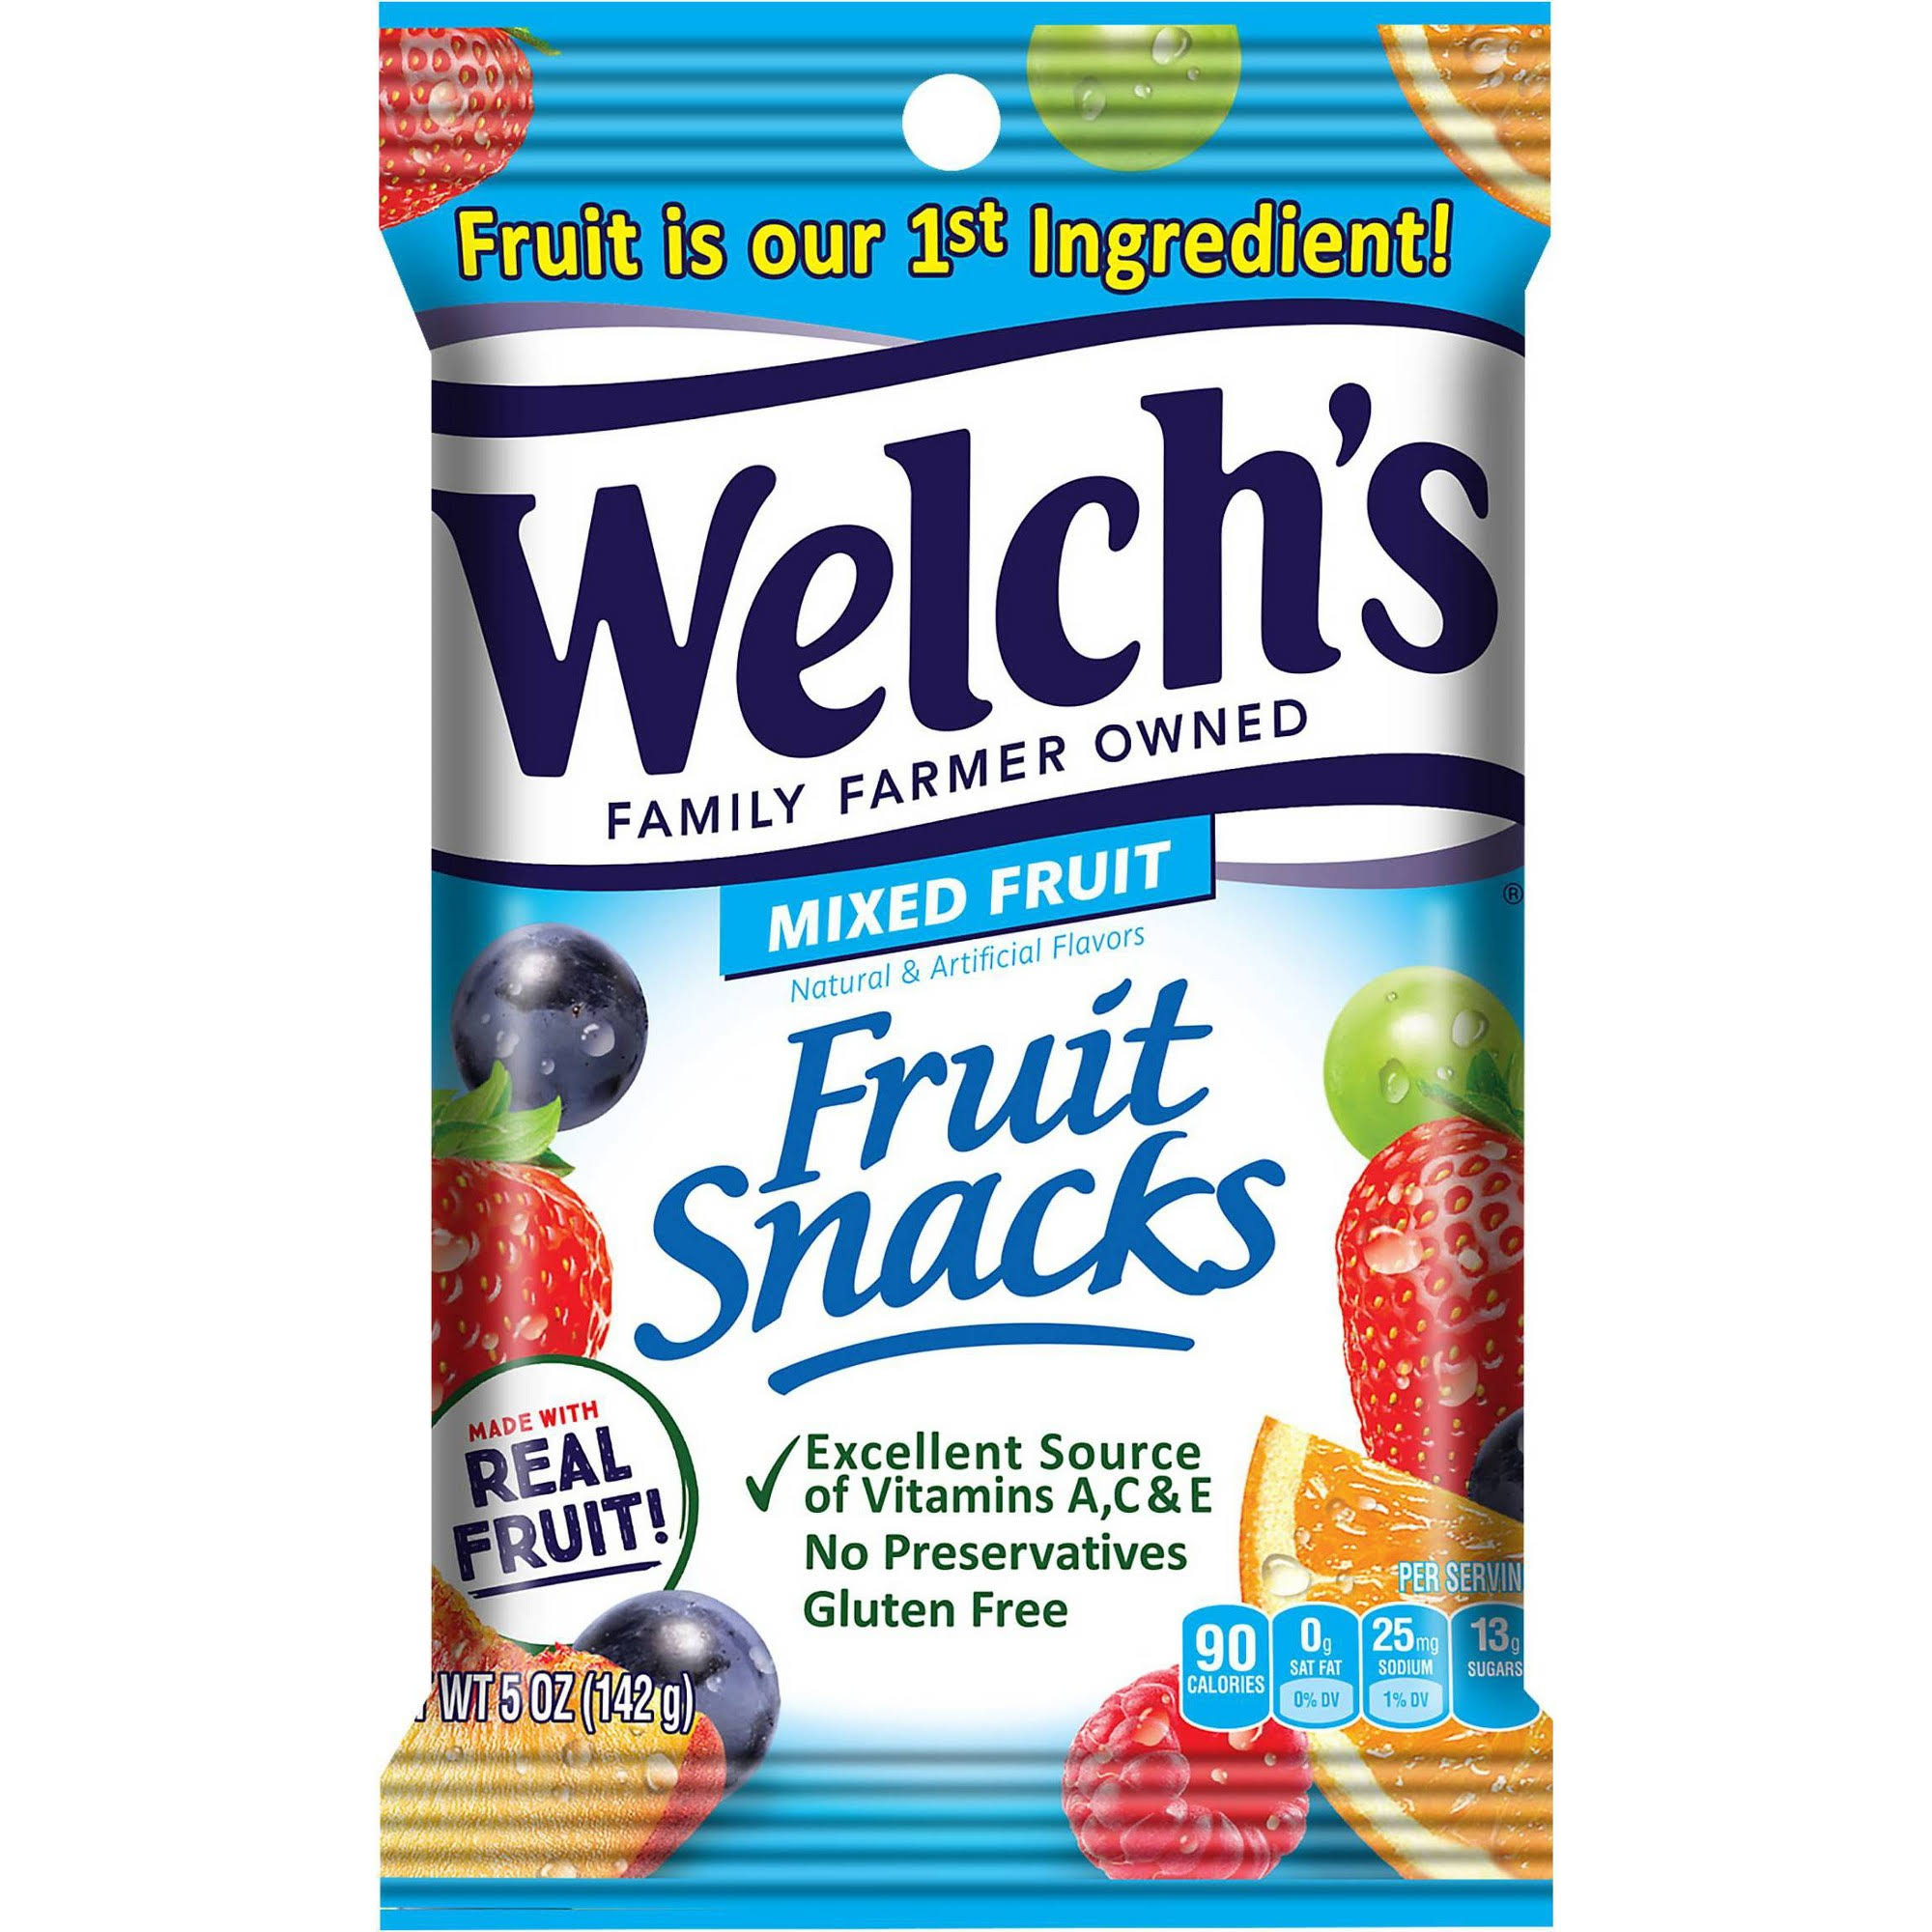 Welch's Fruit Snacks Mixed Fruit